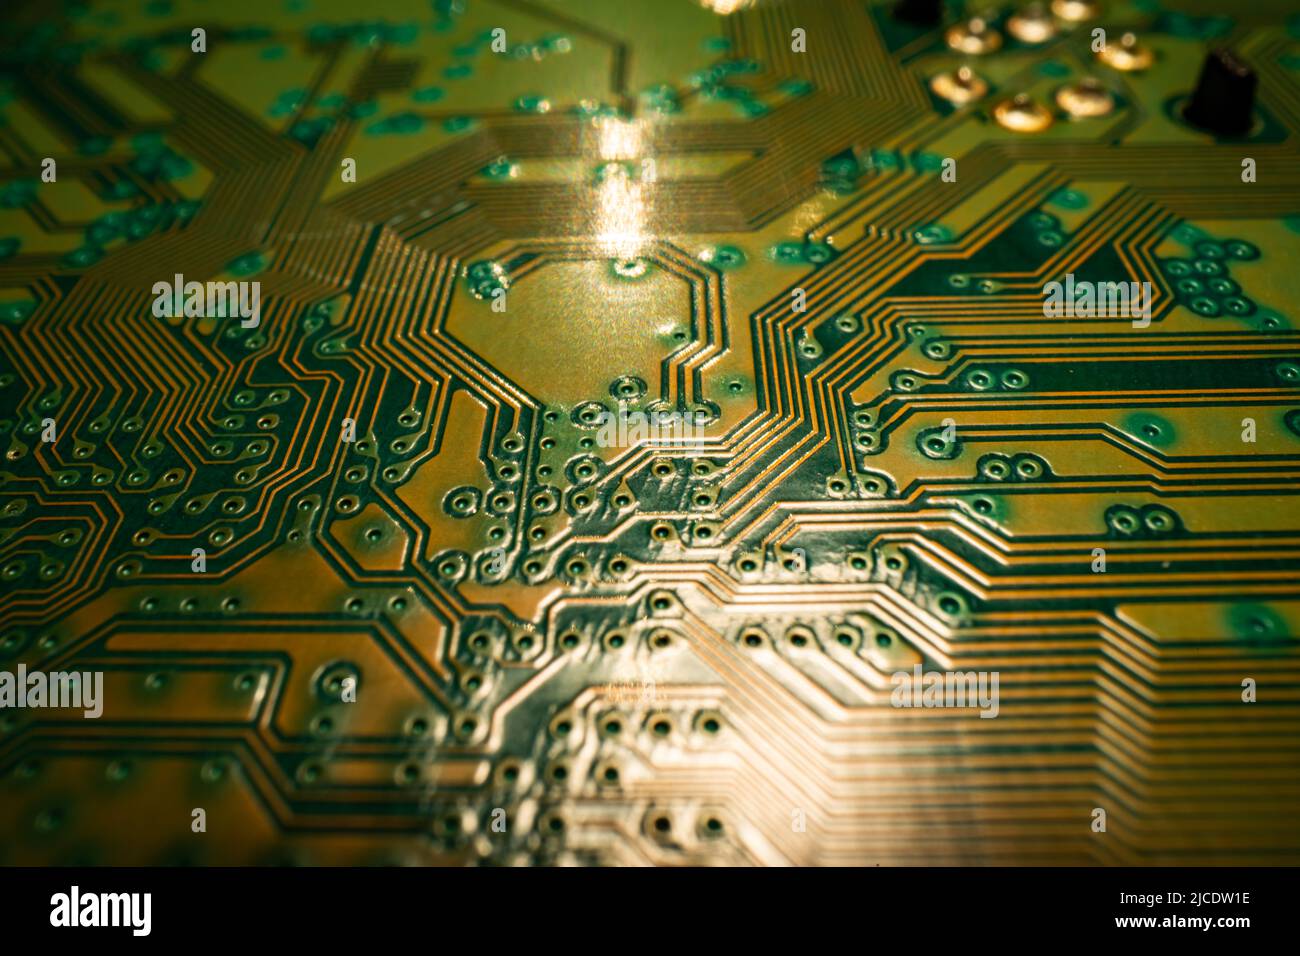 Technology background with circuit board. Electronic computer hardware technology. Motherboard digital chip. Tech science texture. Stock Photo